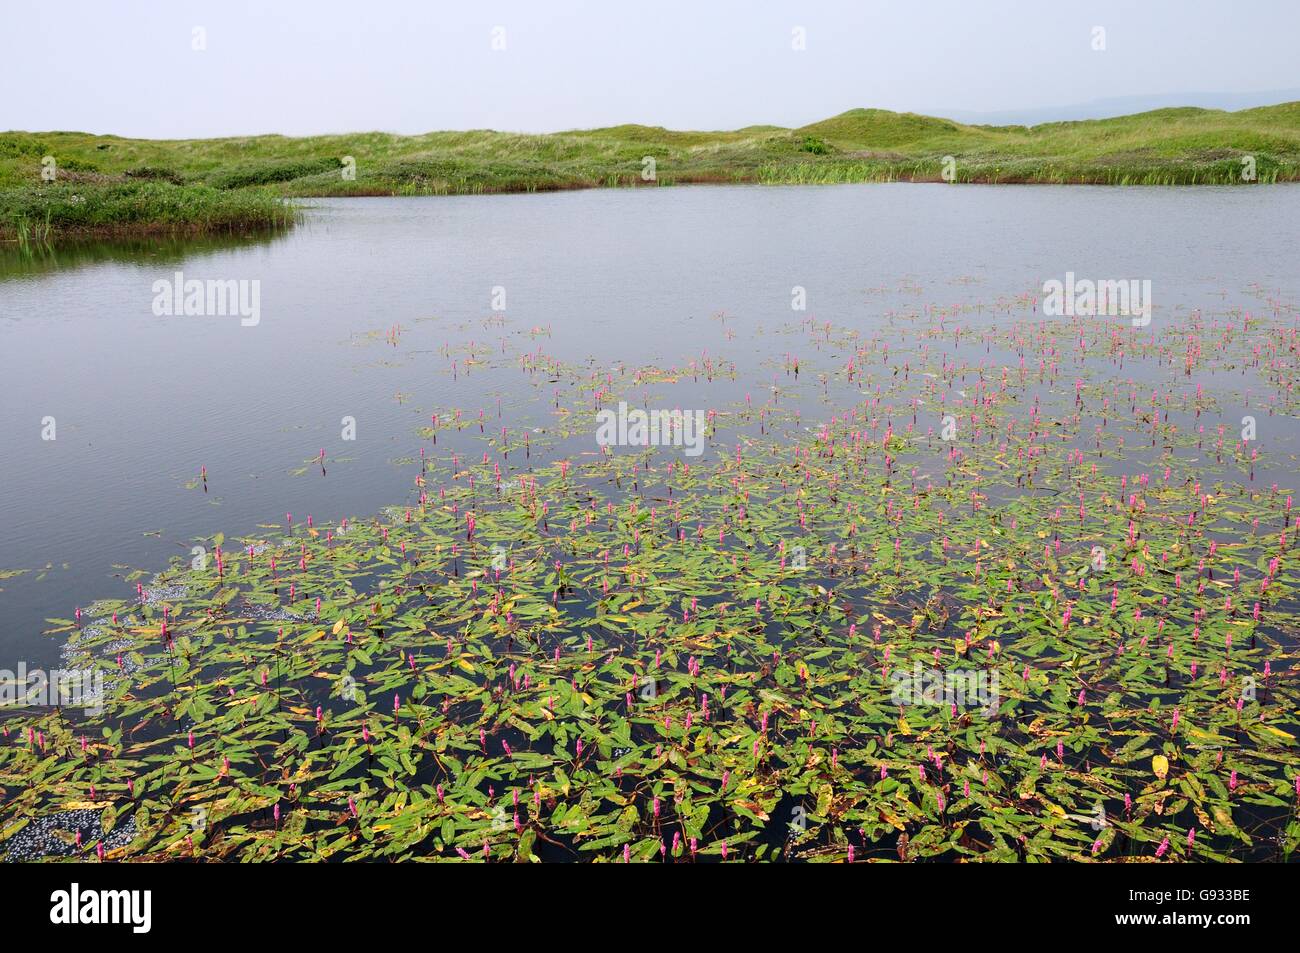 Amphibious Bistort Persicaria amphibia growing in ponds at Kenfig National Nature Reserve Bridgend Wales Stock Photo